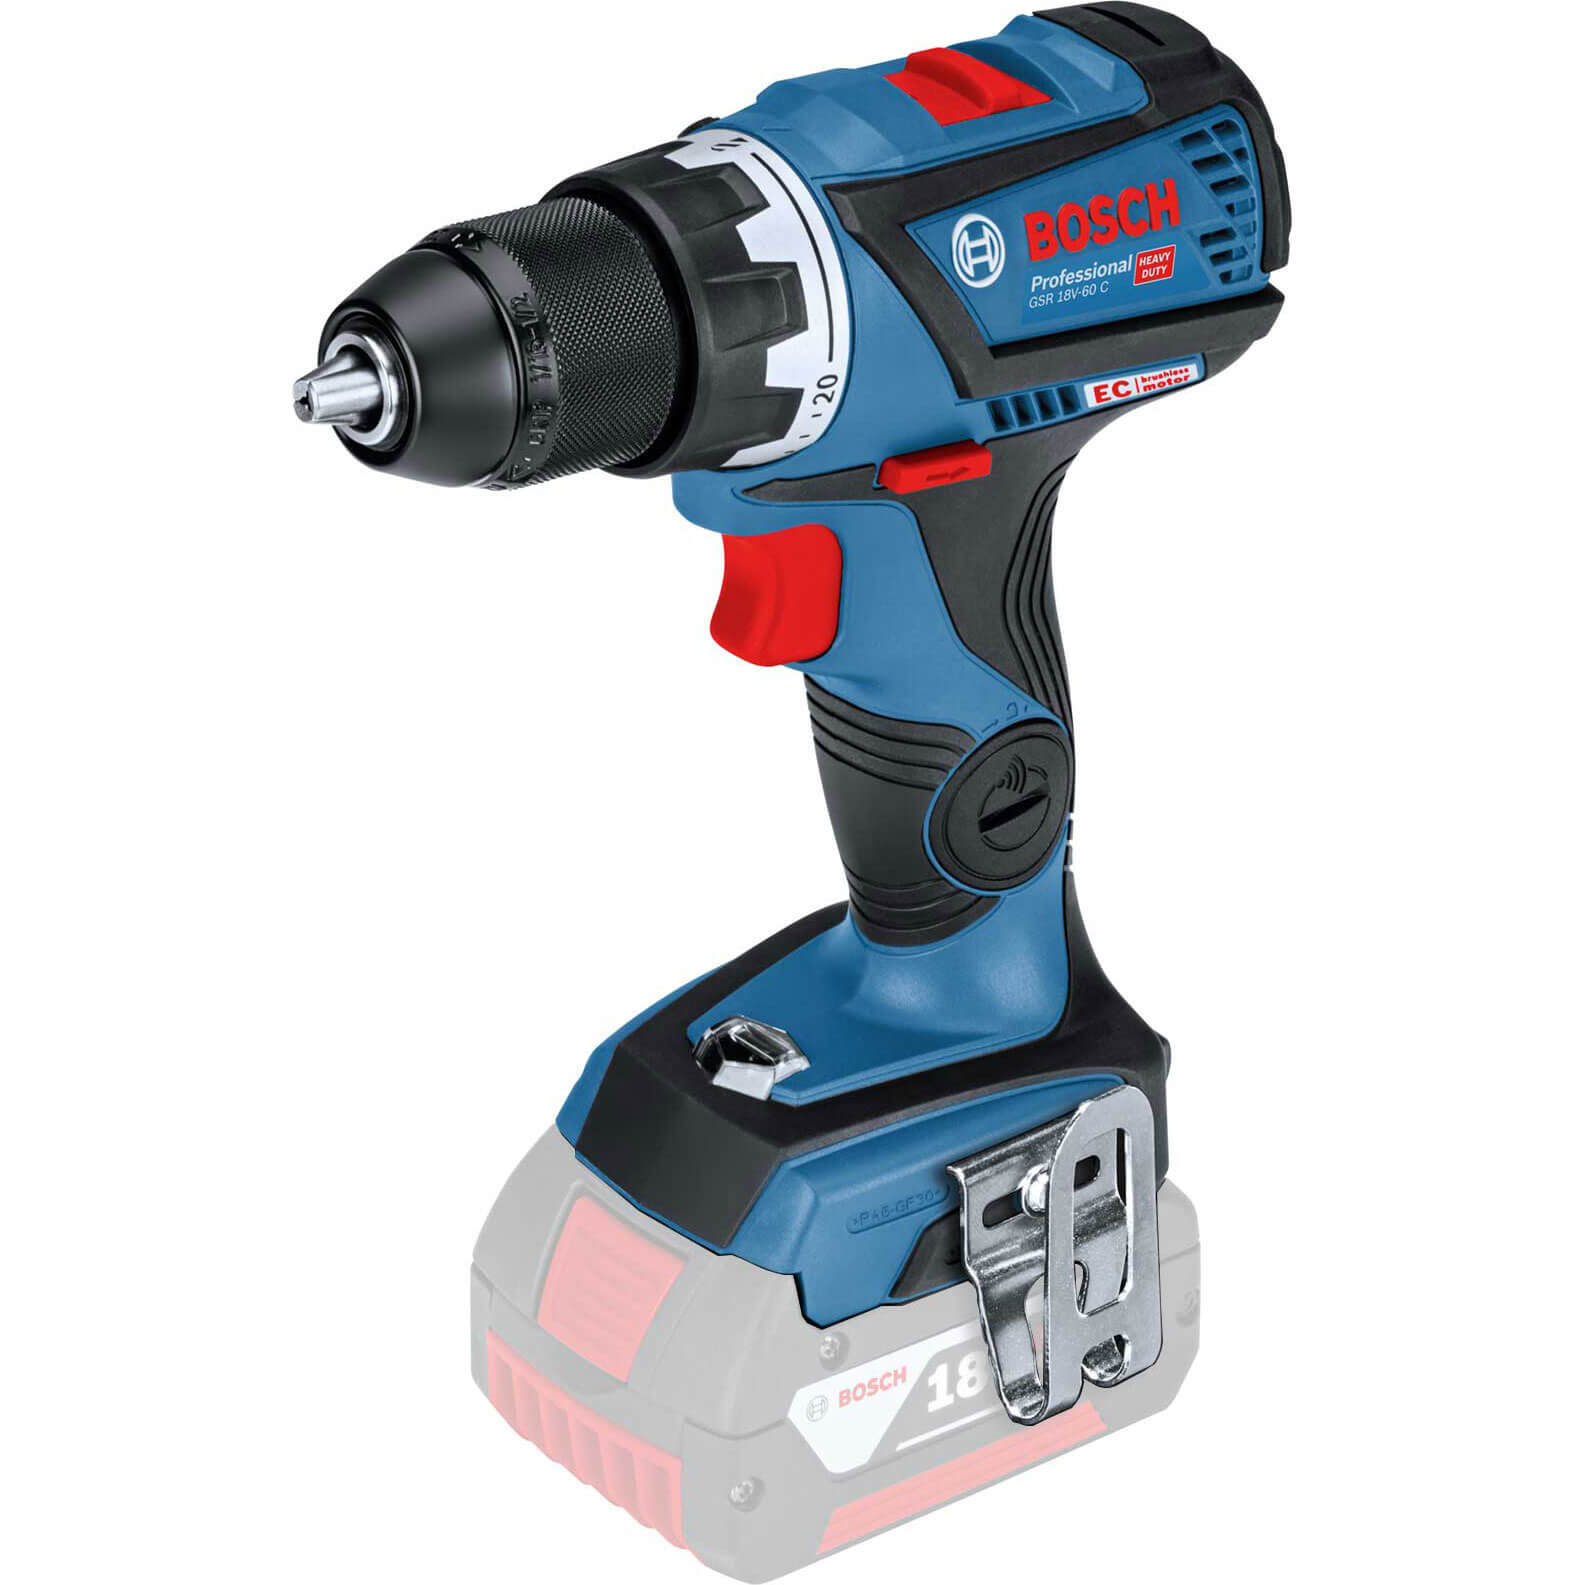 Photo of Bosch Gsr 18 V-60 C 18v Cordless Connect Ready Drill Driver No Batteries No Charger Case